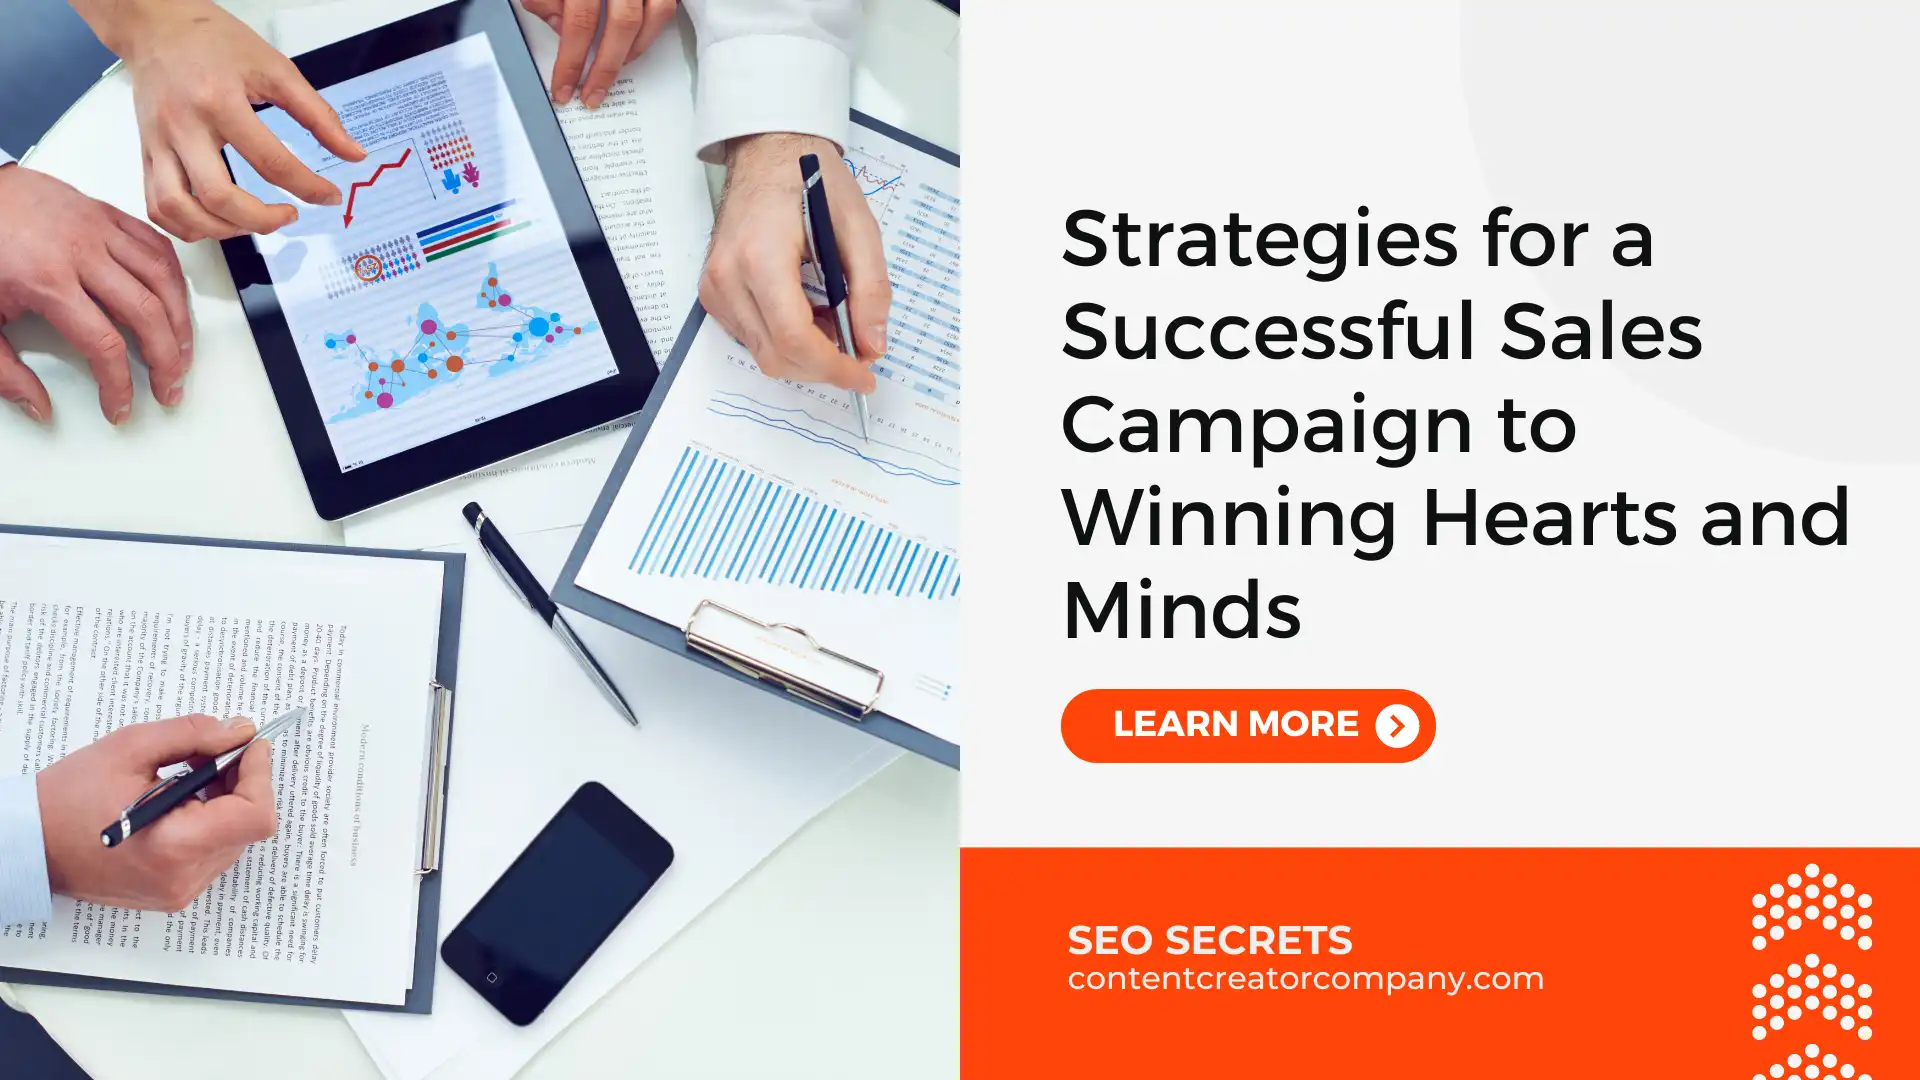 Strategies for a Successful Sales Campaign to Winning Hearts and Minds